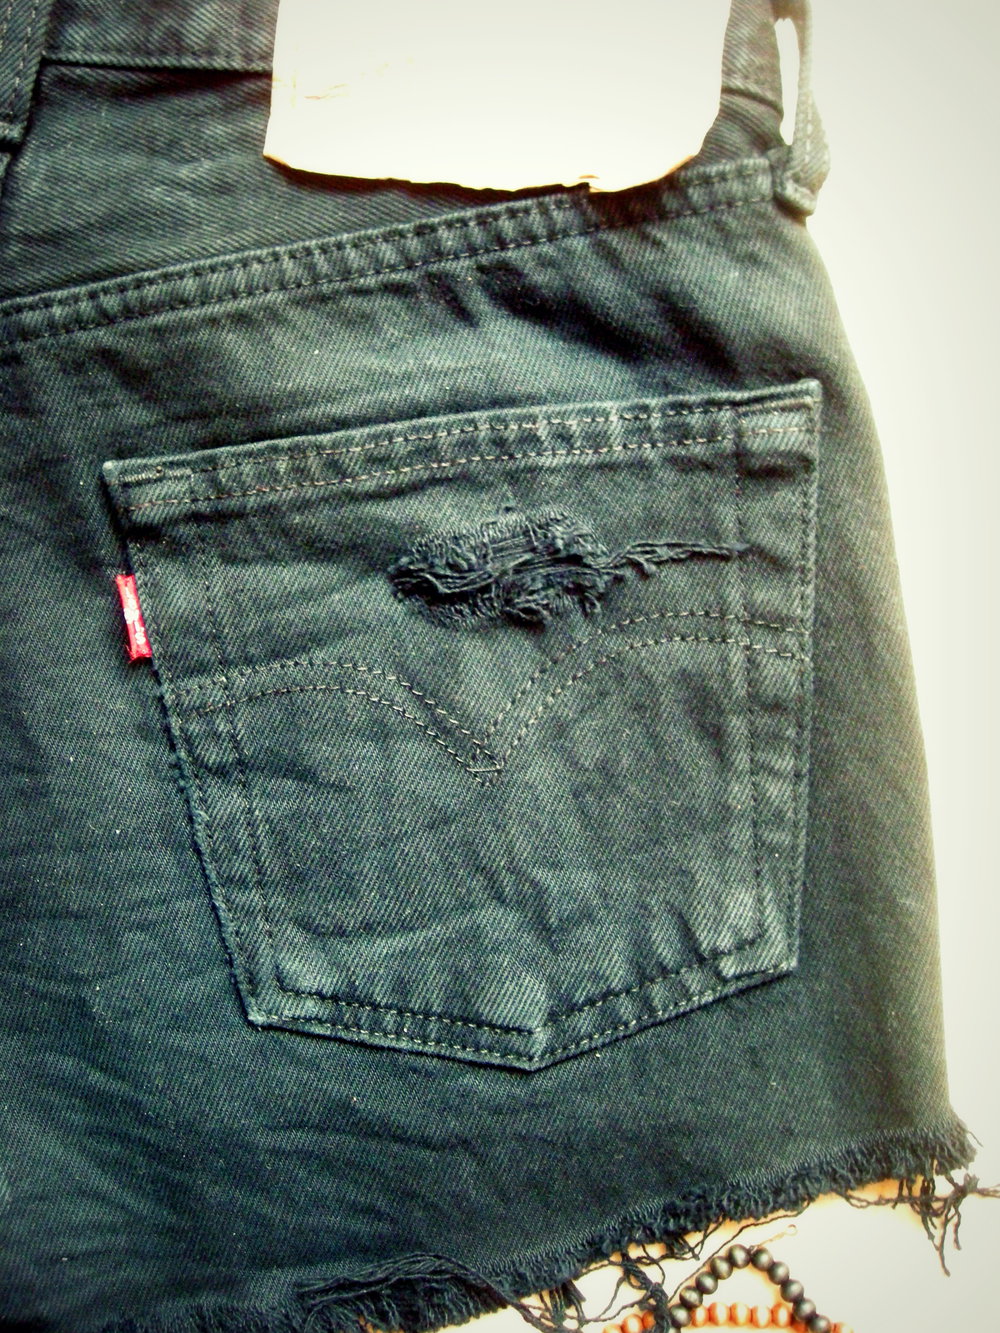 Levis 501 Special edition W29 Shorts Vintage Jeans High Waist Blogger DIY S 36